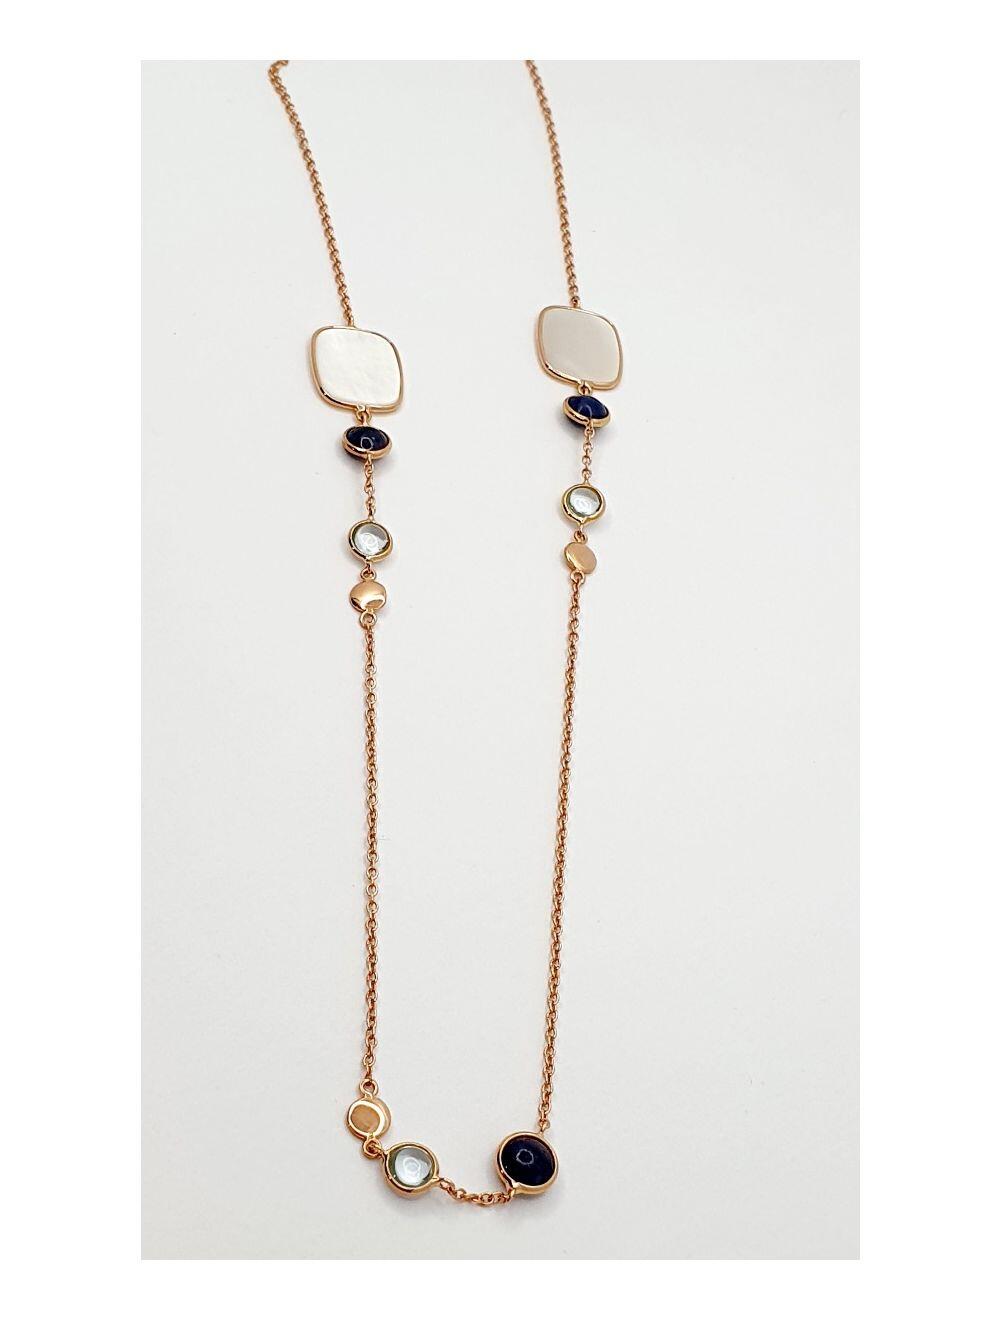 # Rose gold necklace with mother-of-pearl, aquamarine and rough blue sapphire